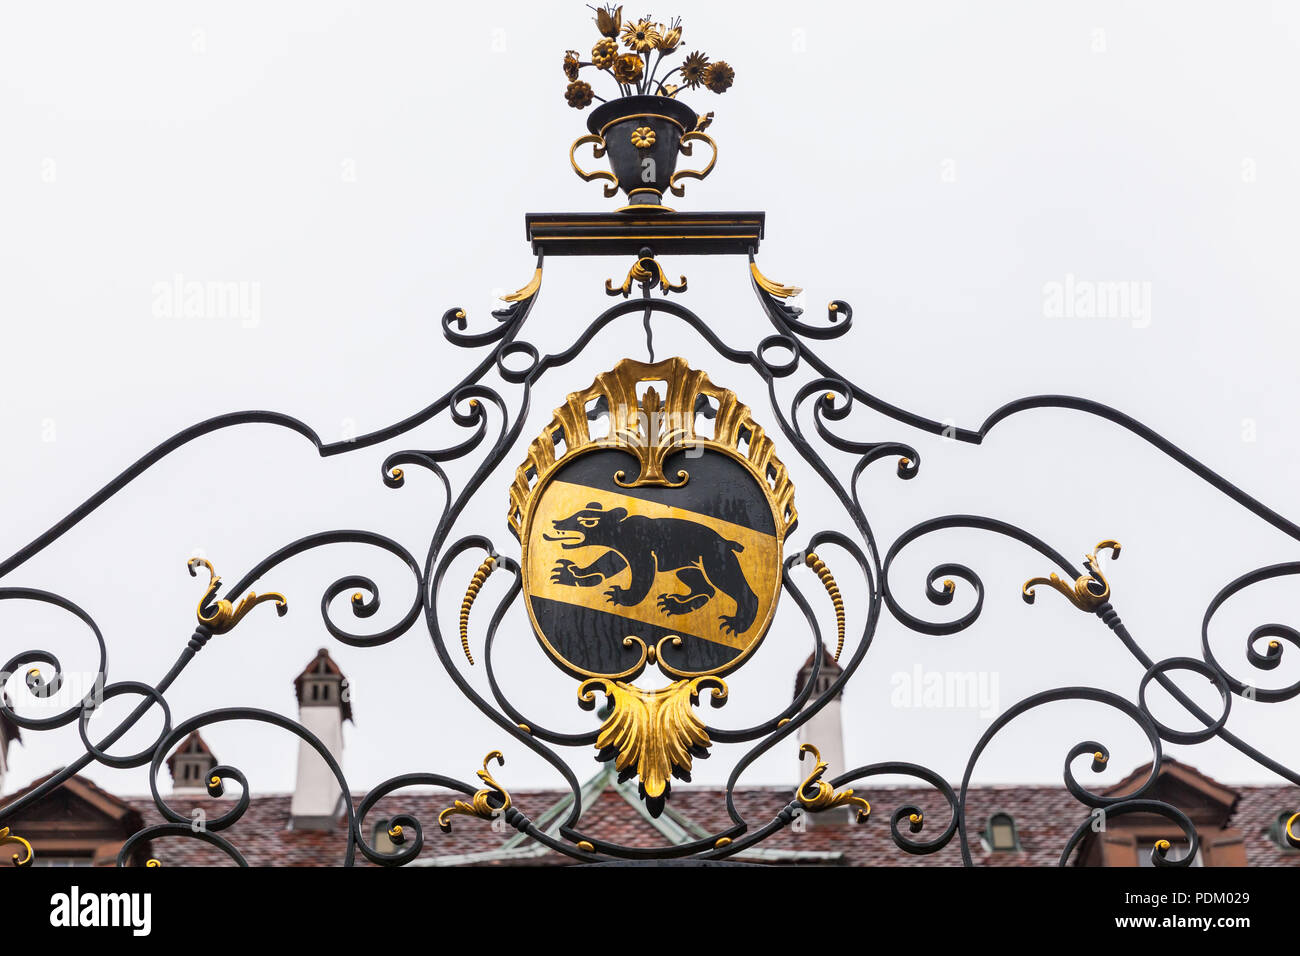 Cast-iron grate with the Bern coat of arms, Switzerland. Front view Stock Photo